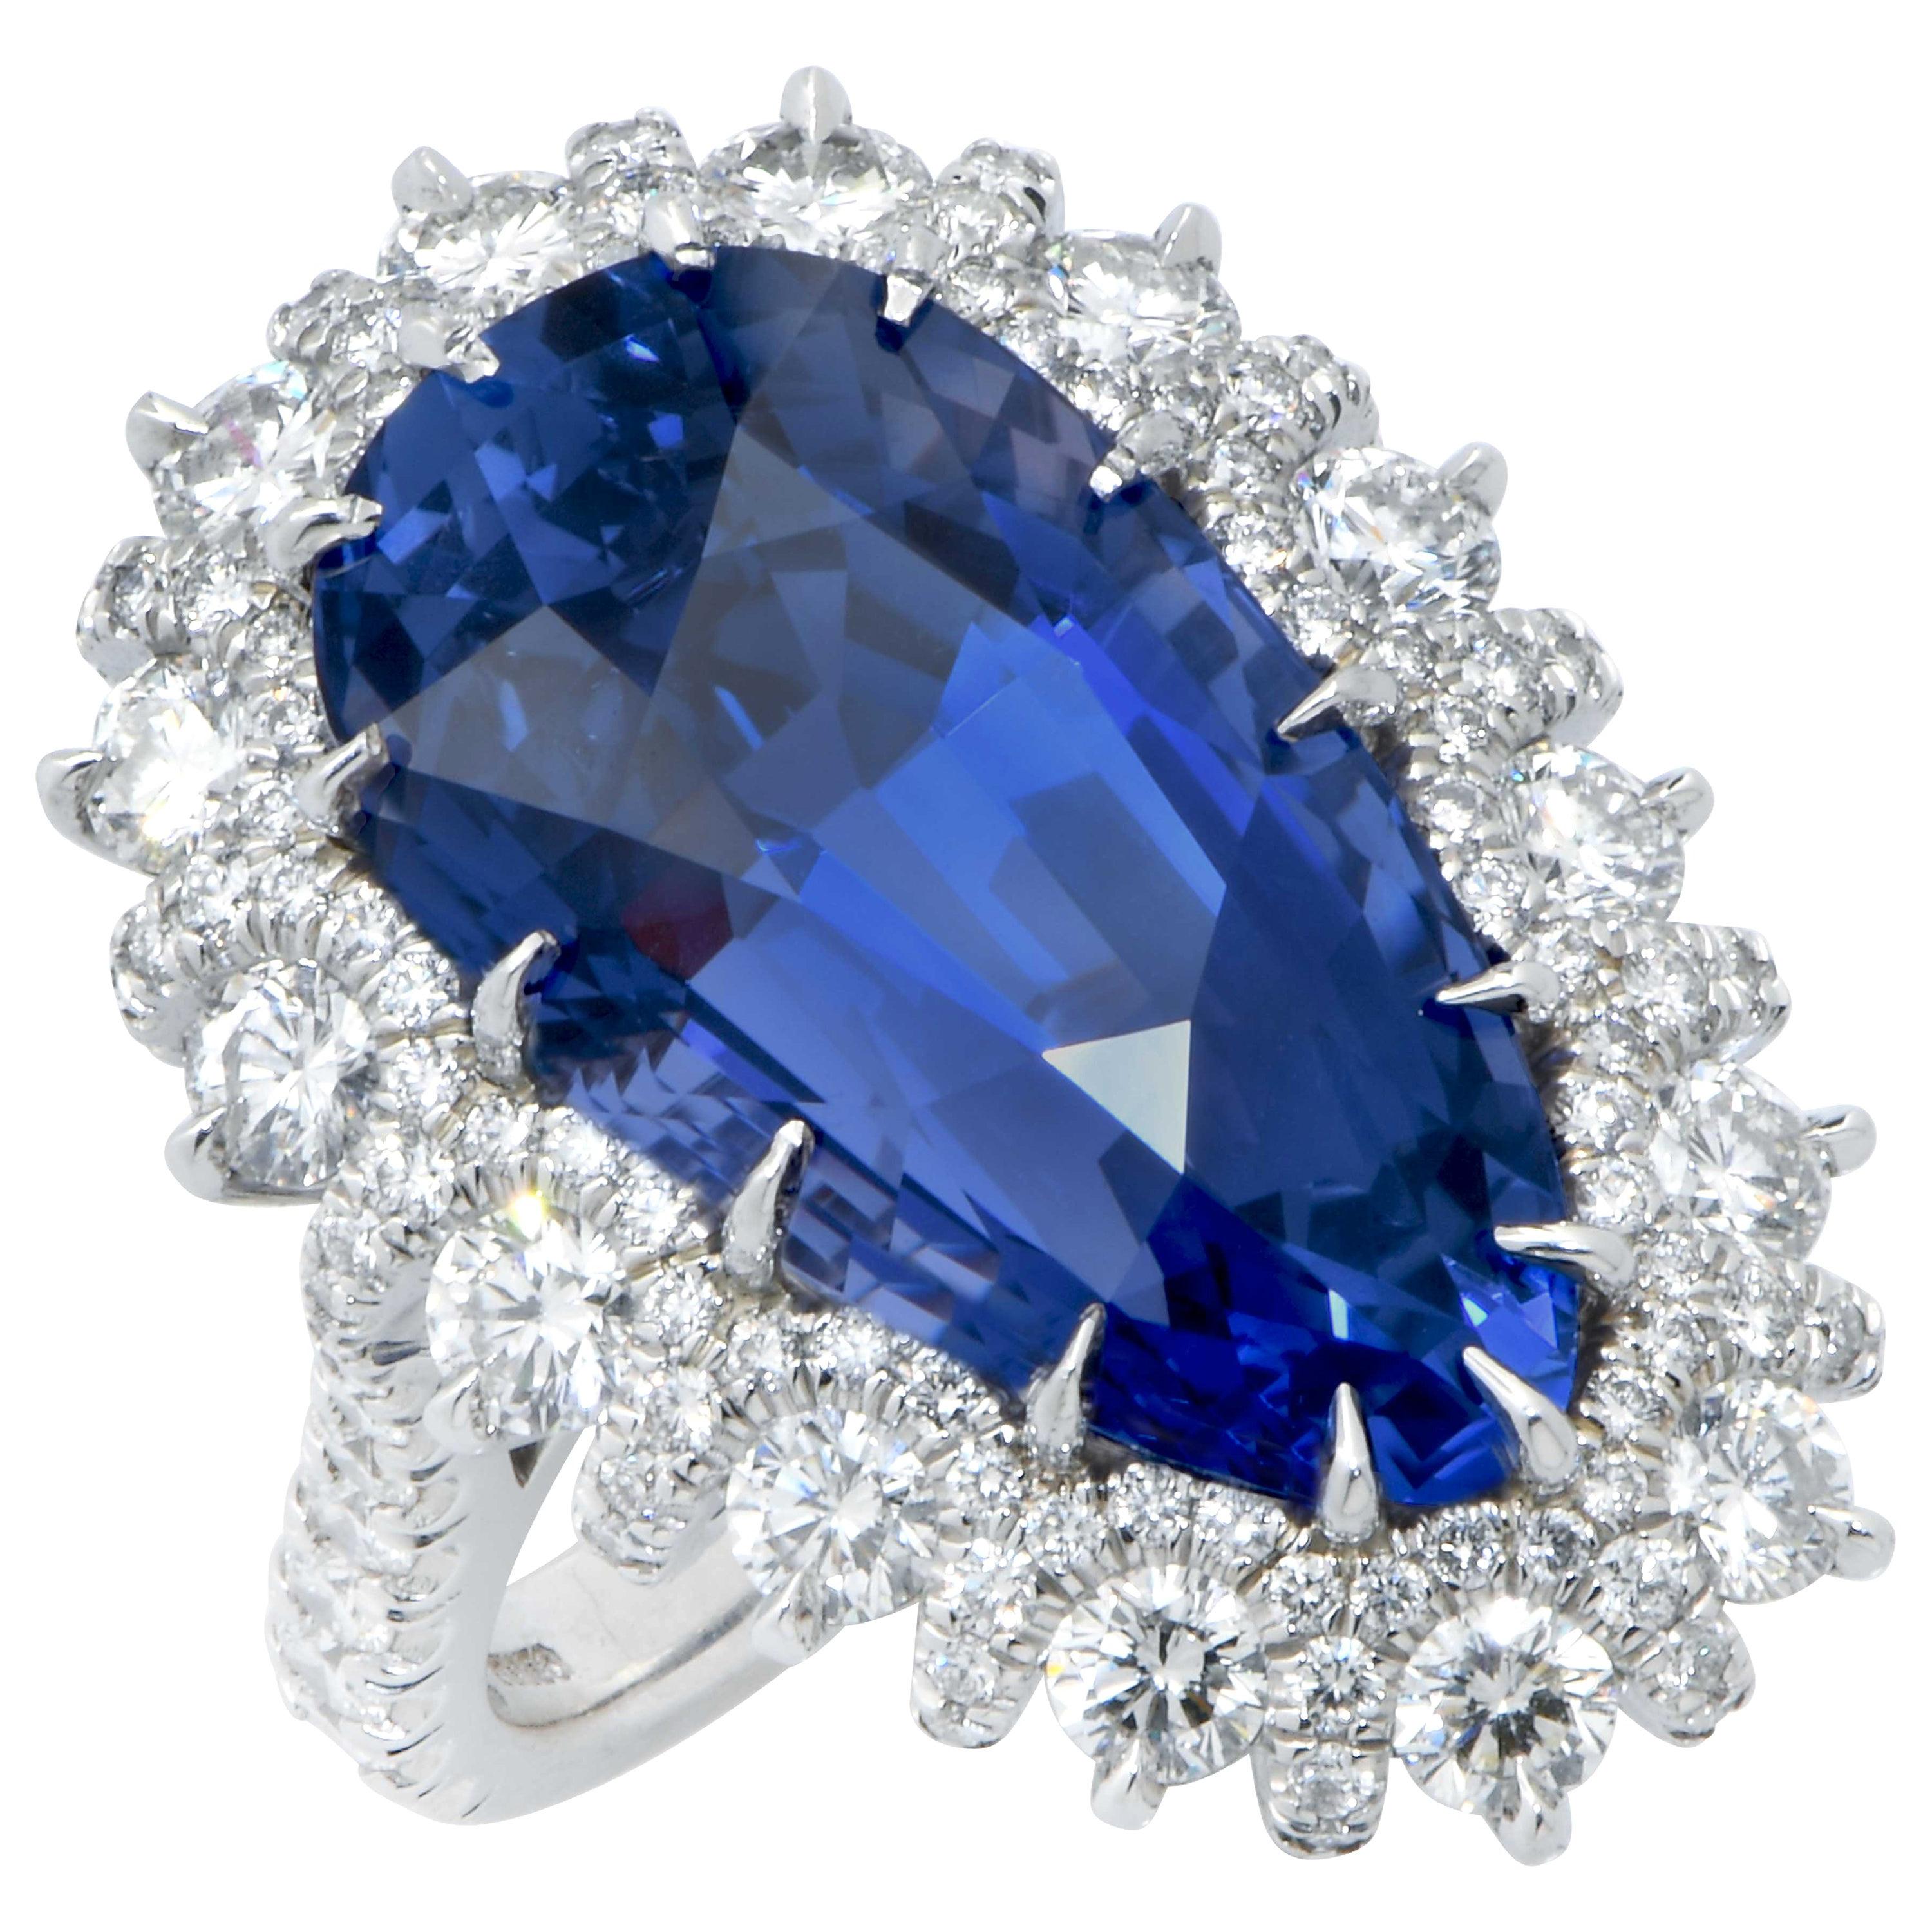 Important 19 Carat AGL Graded Pear Shaped Sapphire and Diamond Ring For Sale